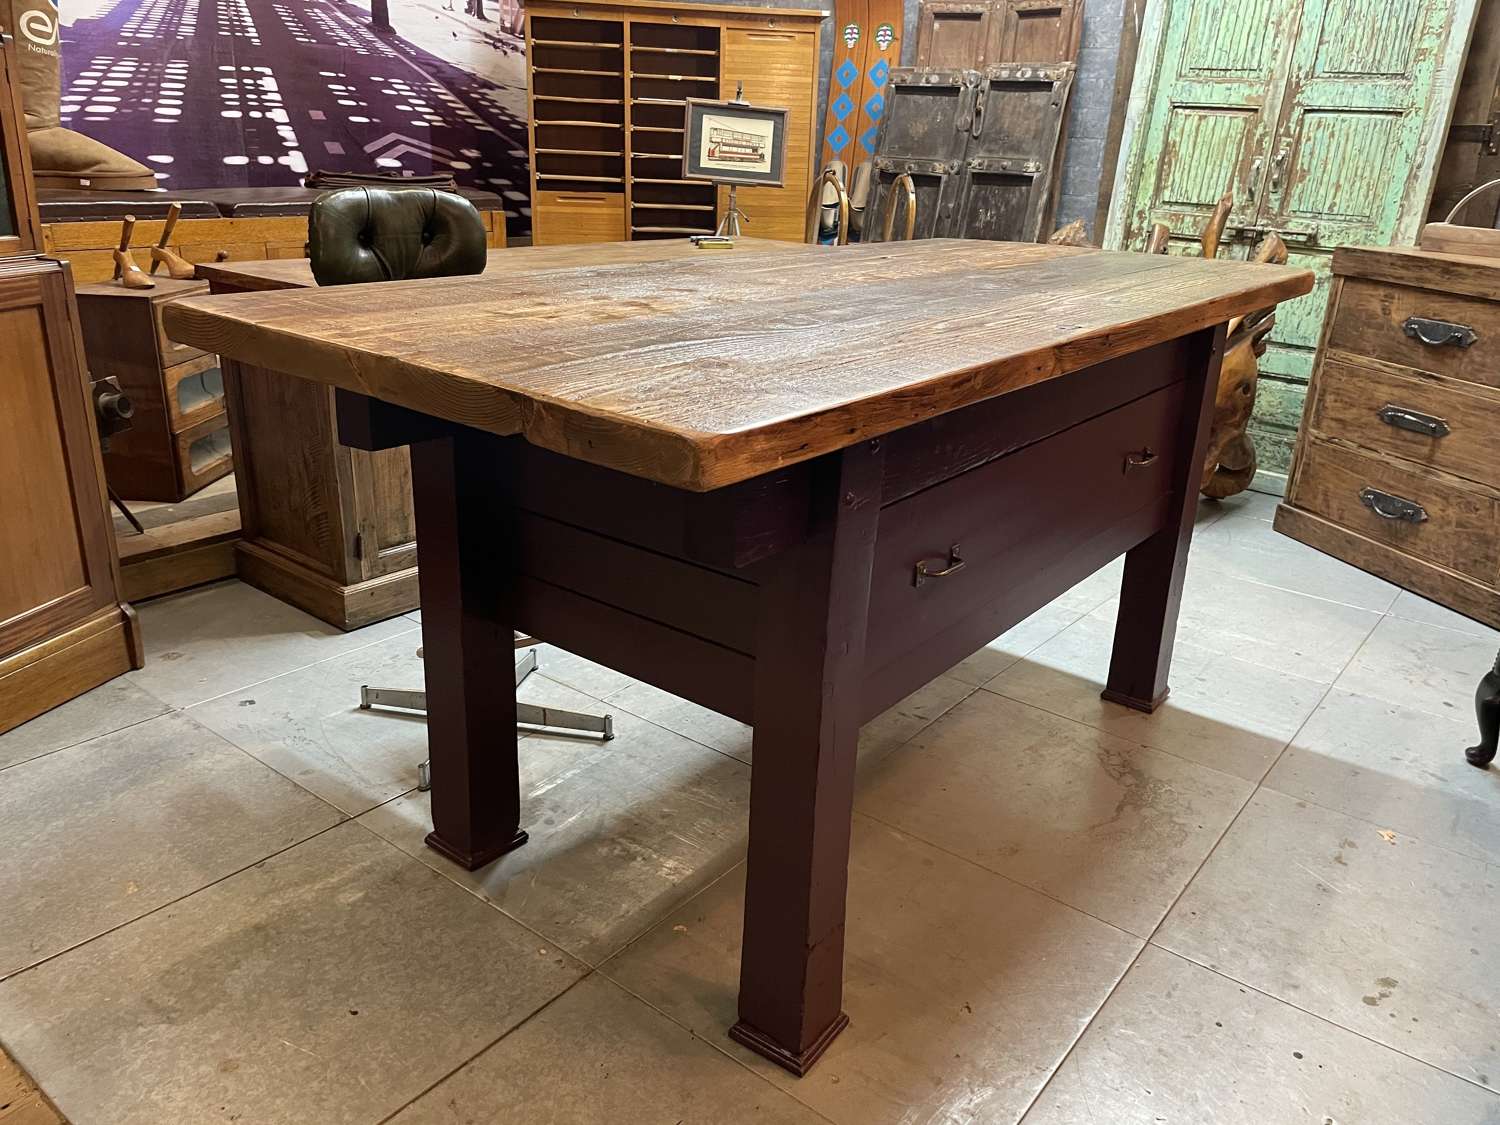 A Solid Oak Kitchen Island with a reclaimed pine top Work station